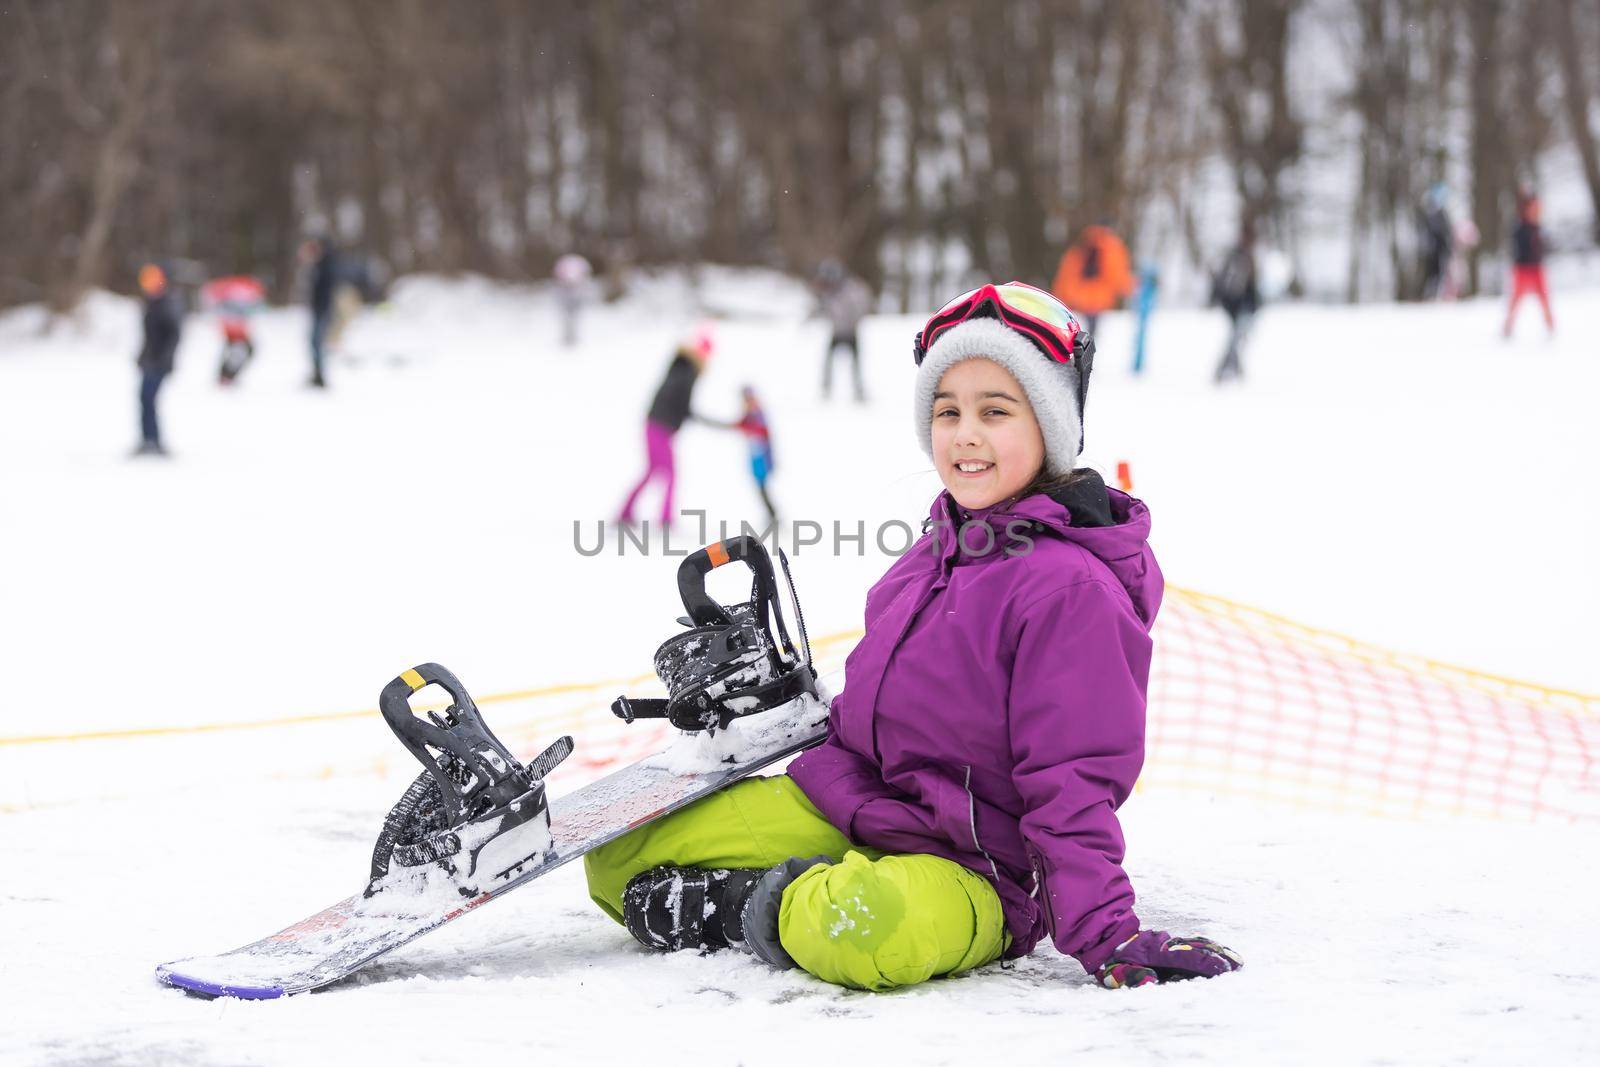 Snowboard winter sport. Cute girl with snowboard going to slide in winter nature.